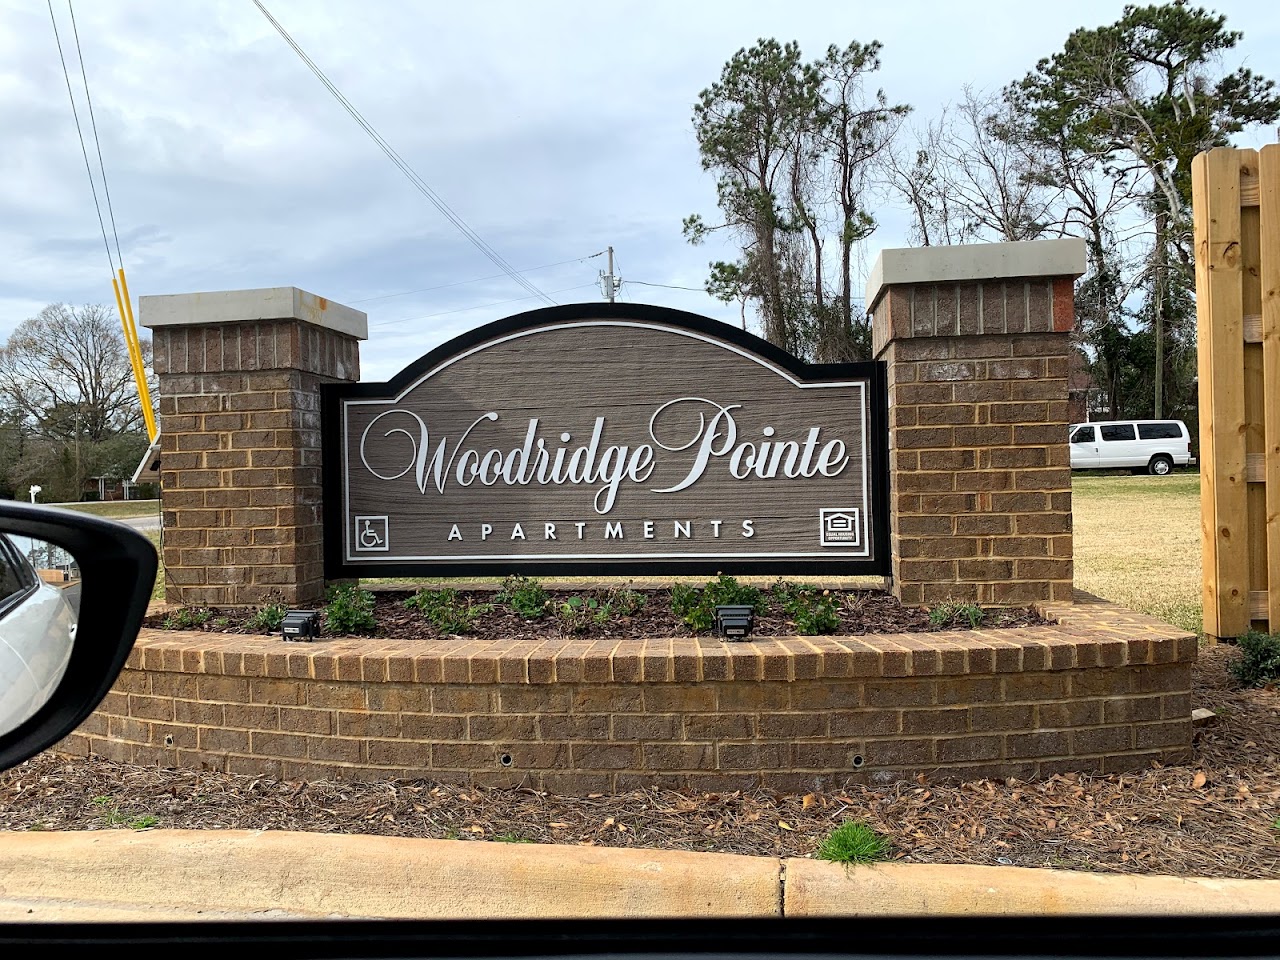 Photo of WOODRIDGE POINTE. Affordable housing located at 1536 SANDLAPPER WAY WILMINGTON, NC 28412